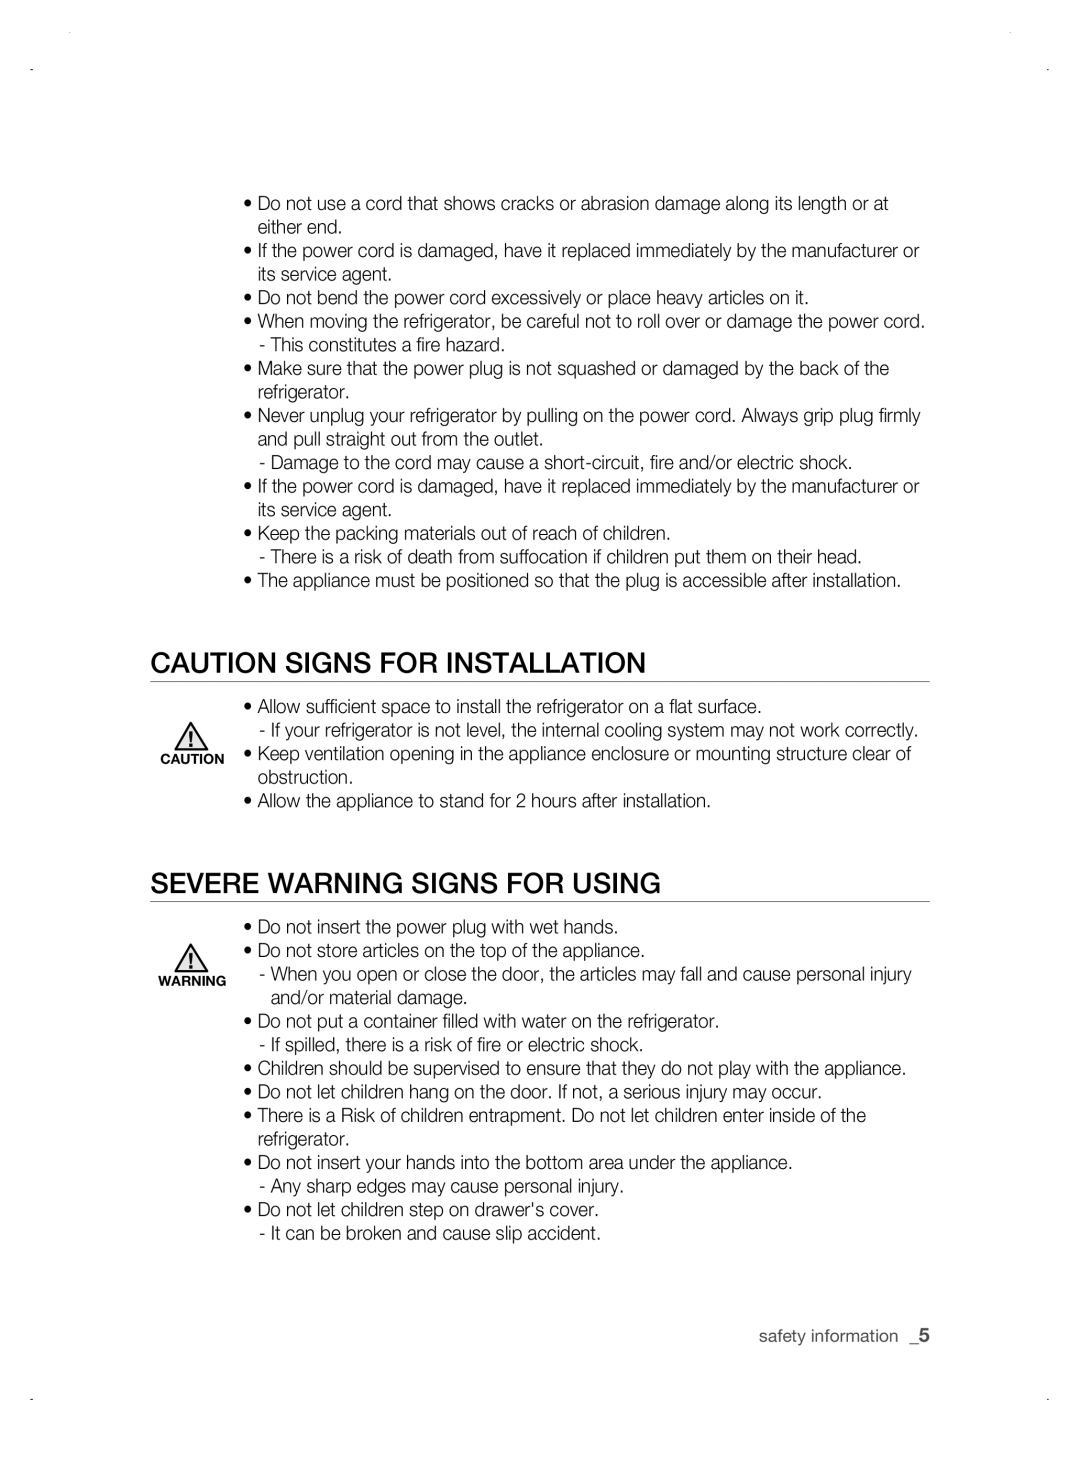 Samsung DA99-01906A user manual CAUTION SIGNS for INSTALLATION, SEVERE WARNING SIGNS for USING, and/or material damage 